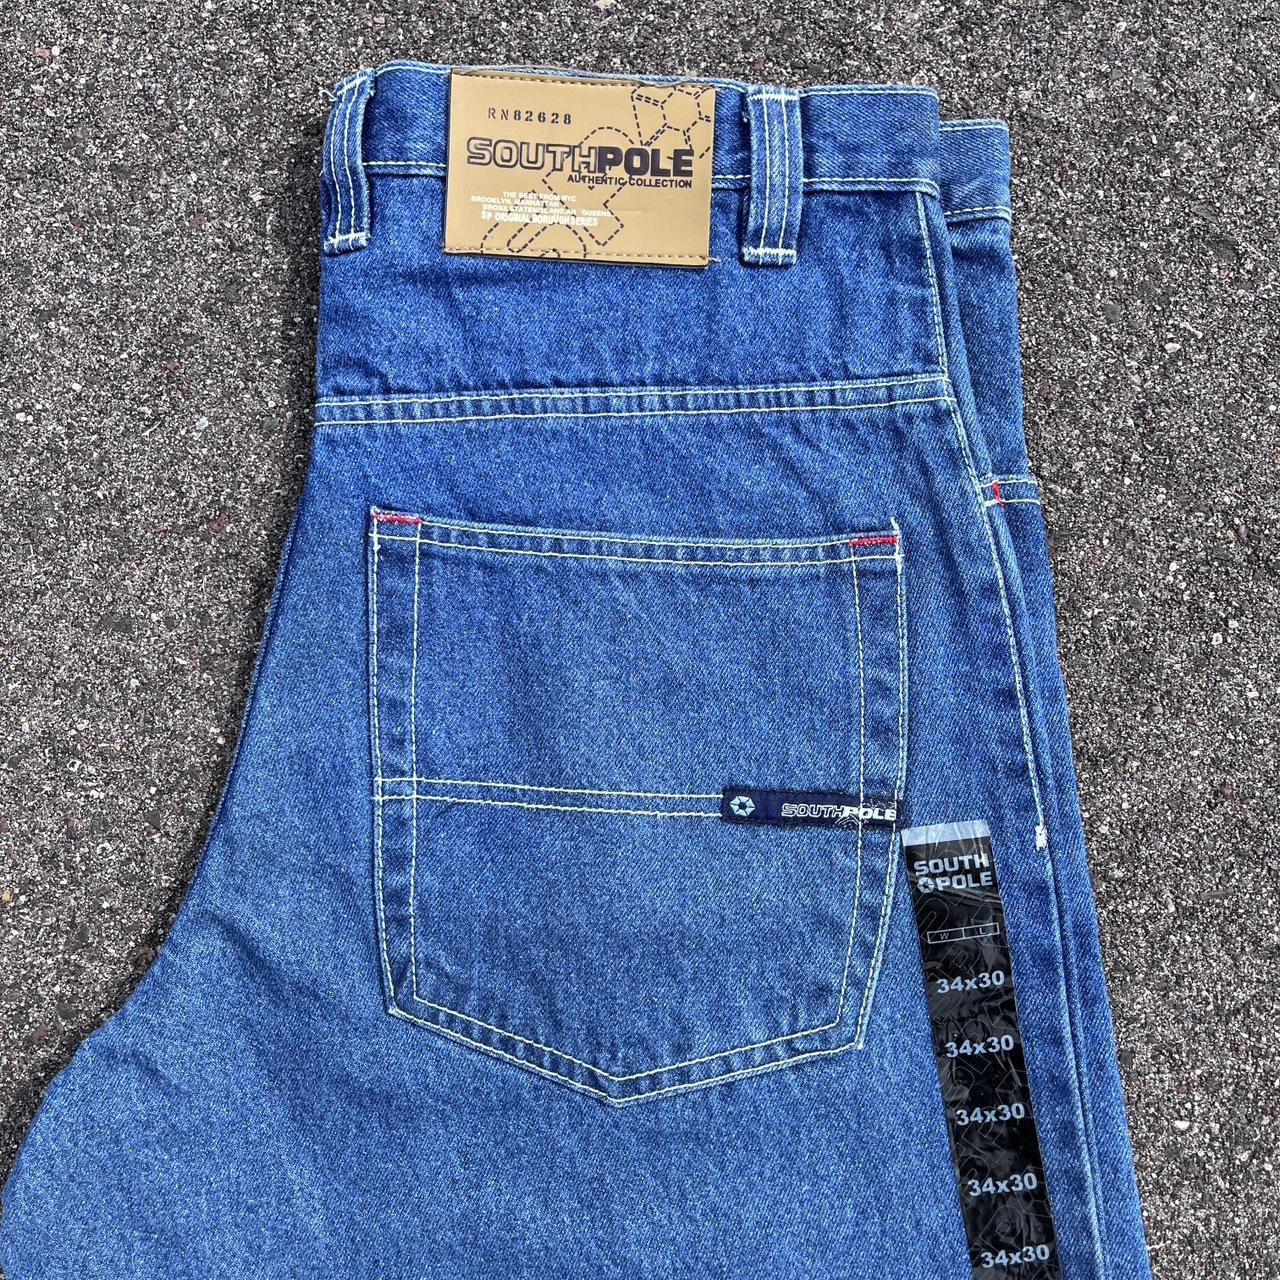 Super sick baggy Y2k southpole jeans! - in perfect,... - Depop